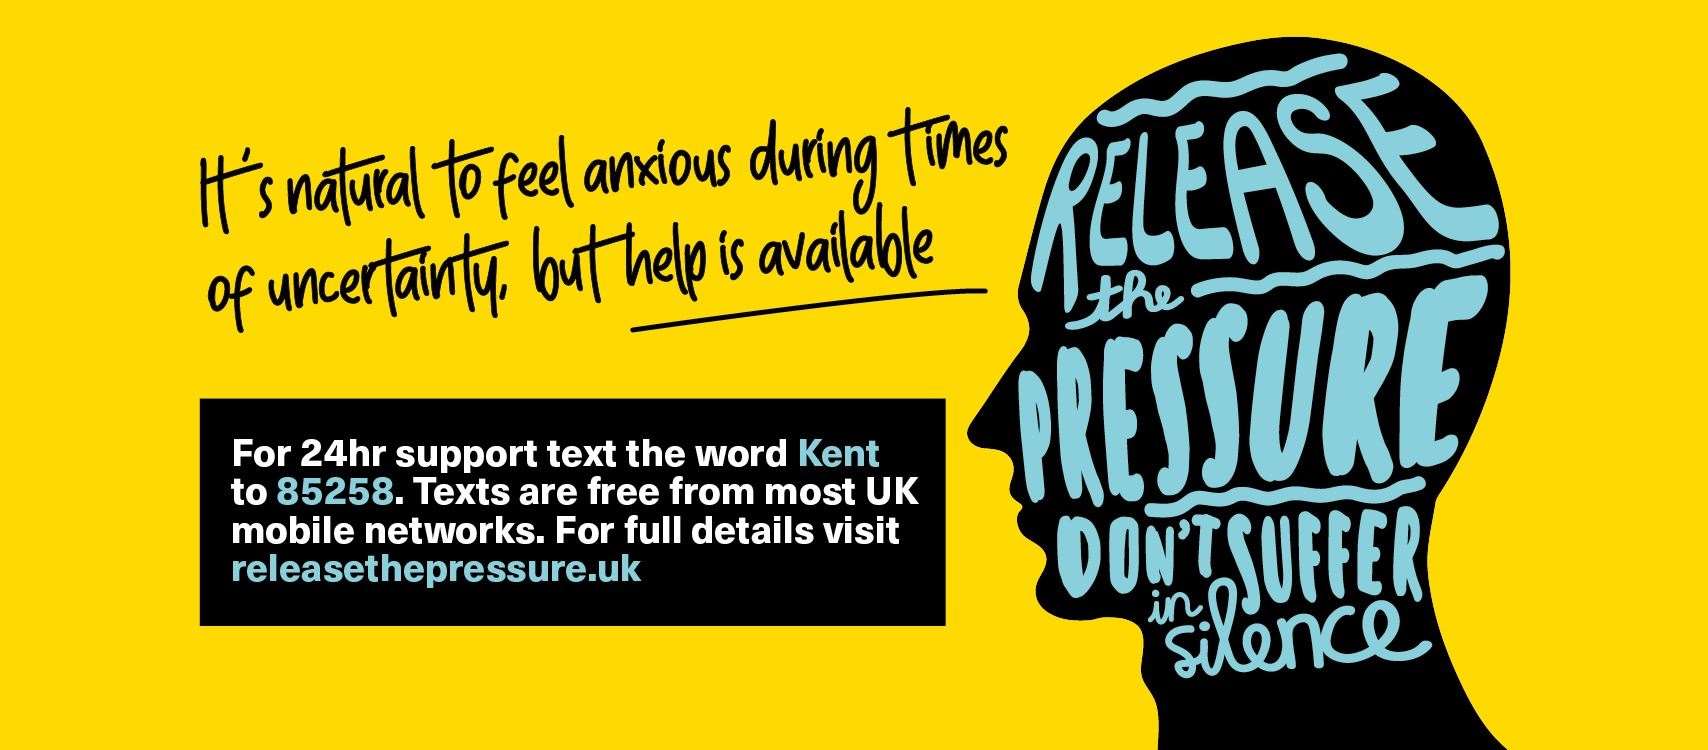 Coronavirus has caused a lot of disruption in many people’s lives. If you are struggling and need someone to talk to, call us or text the word Kent to 85258.